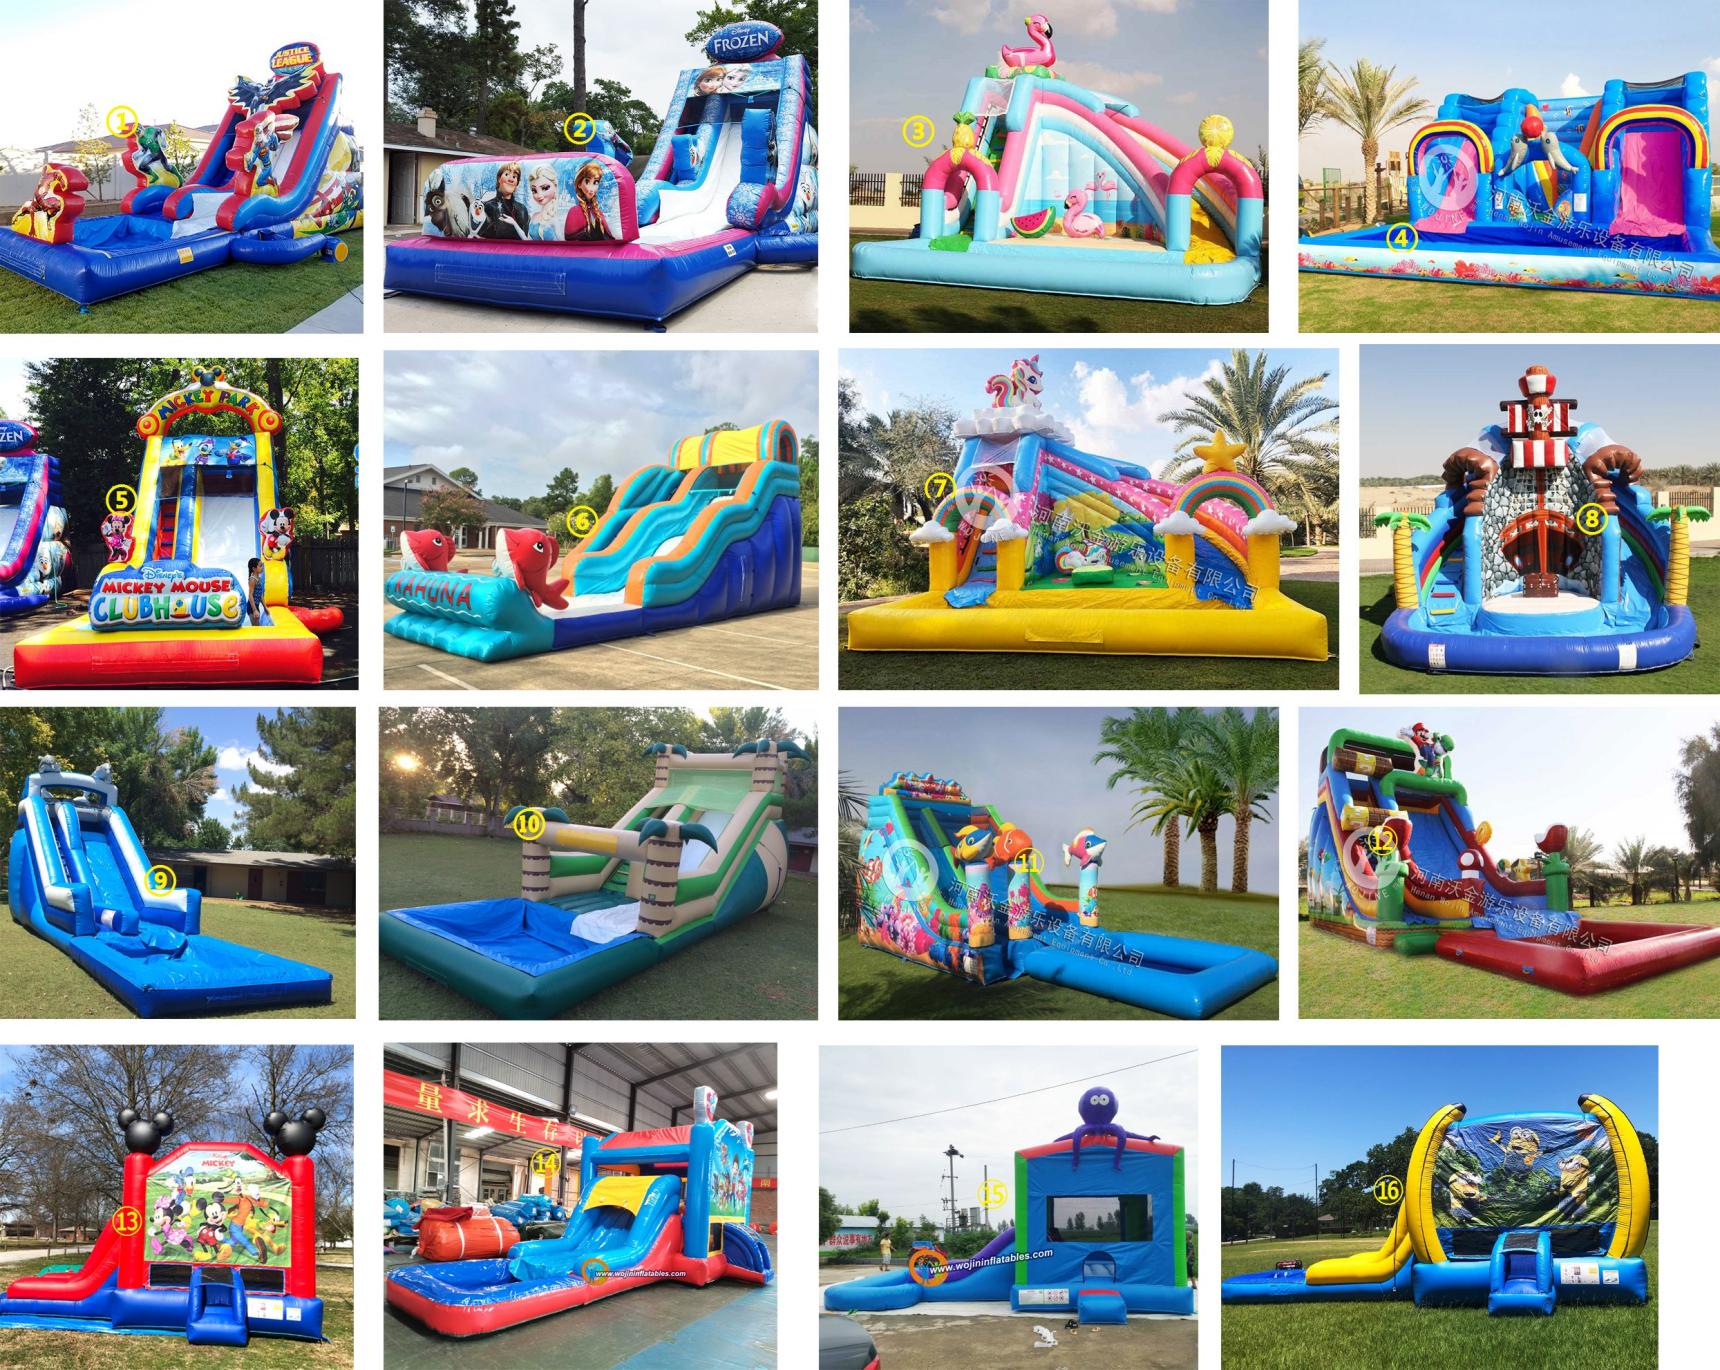 China factory price inflatable legoland combo ground park  frenzy bouncer house jumping castle with slide obstacle game for kids